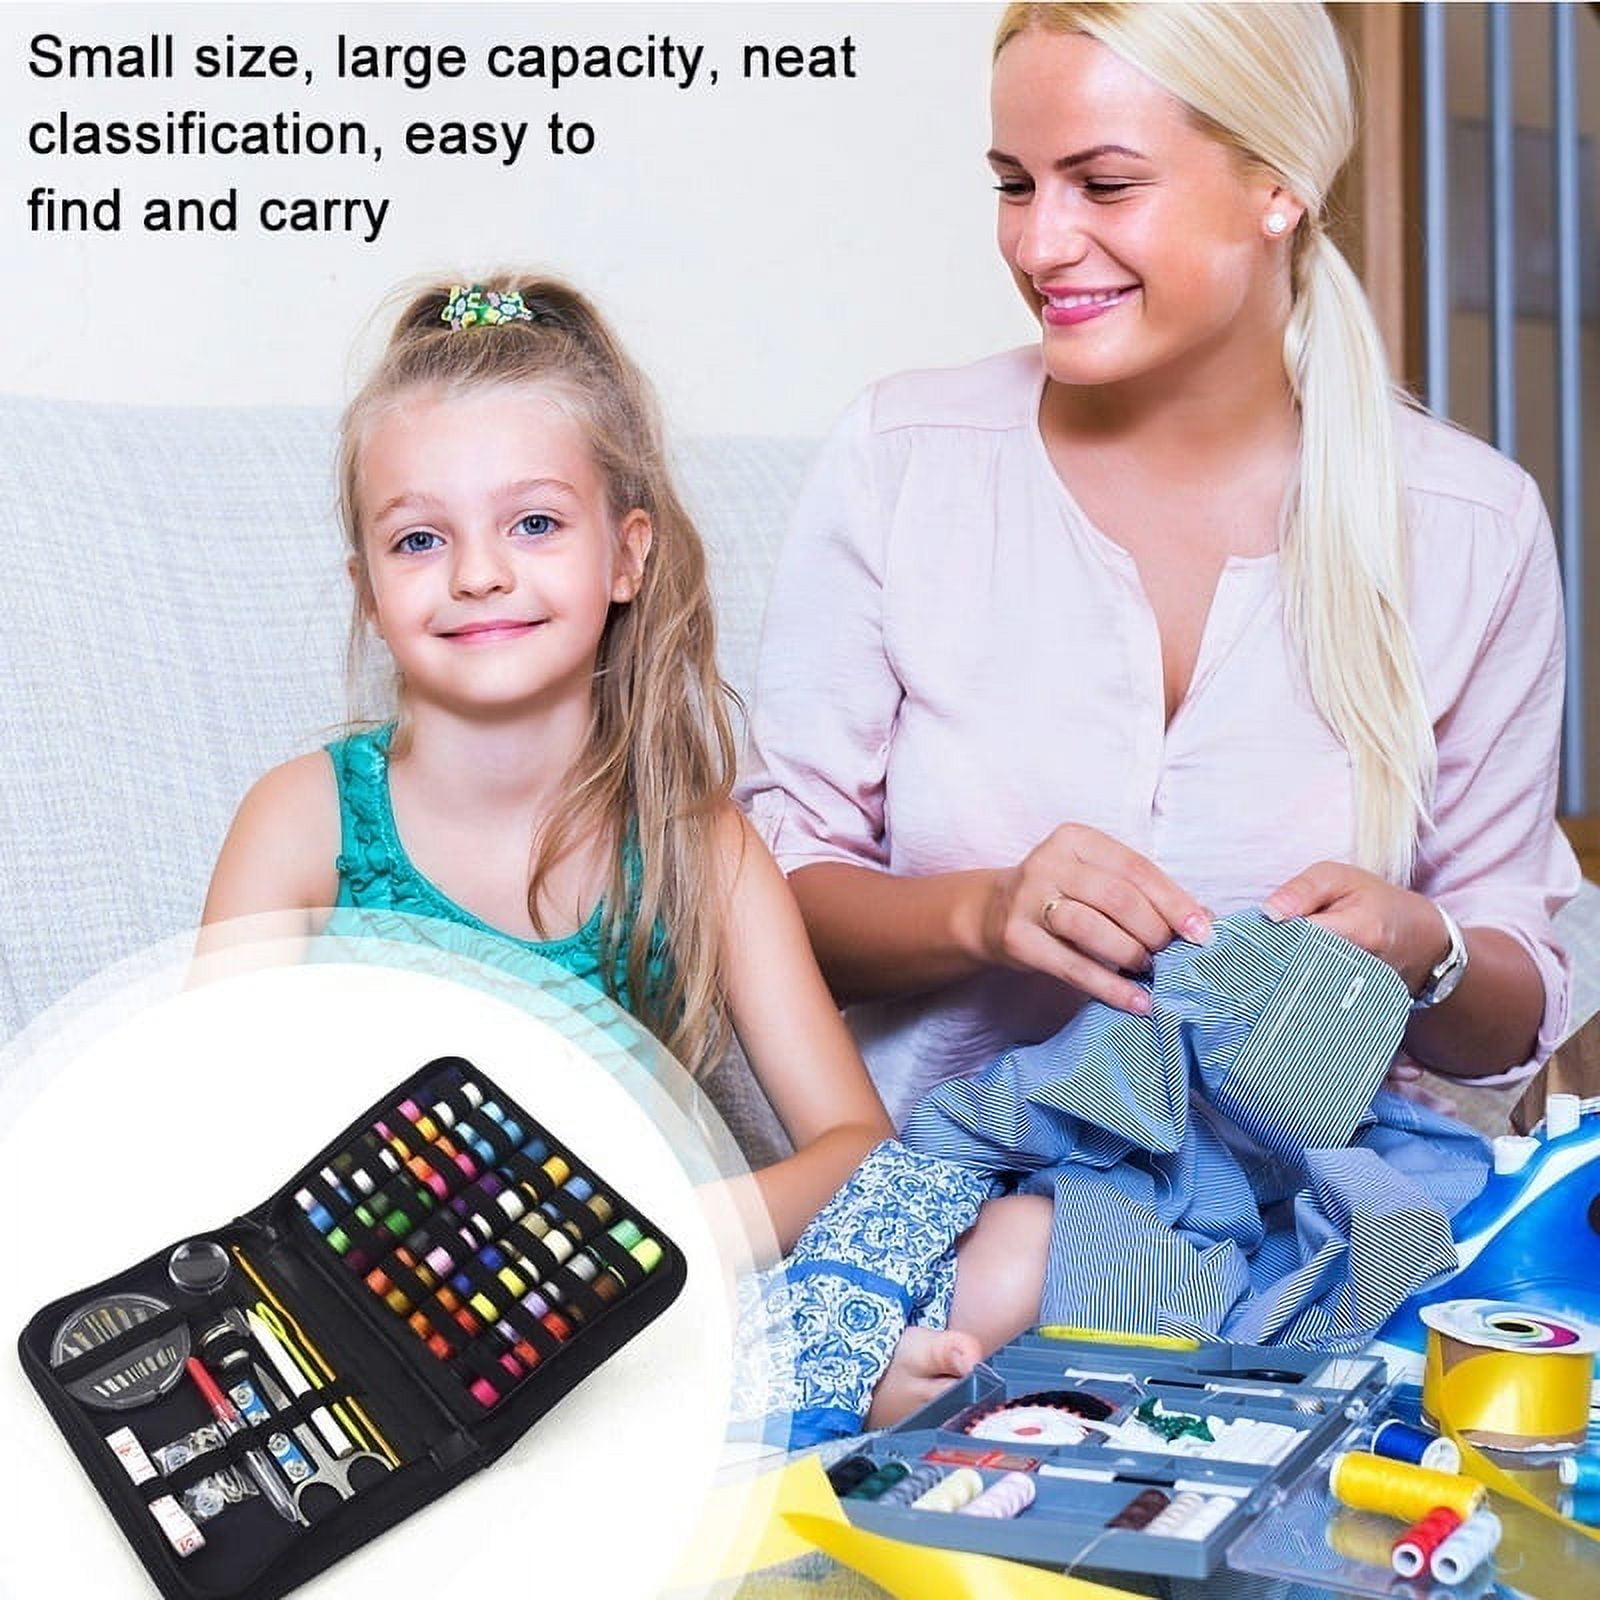 Portable Mini Sewing Kit With Repair Shopify Buy Button Includes  27/74/98/138 Computer Accessories From Amllrf, $12.29